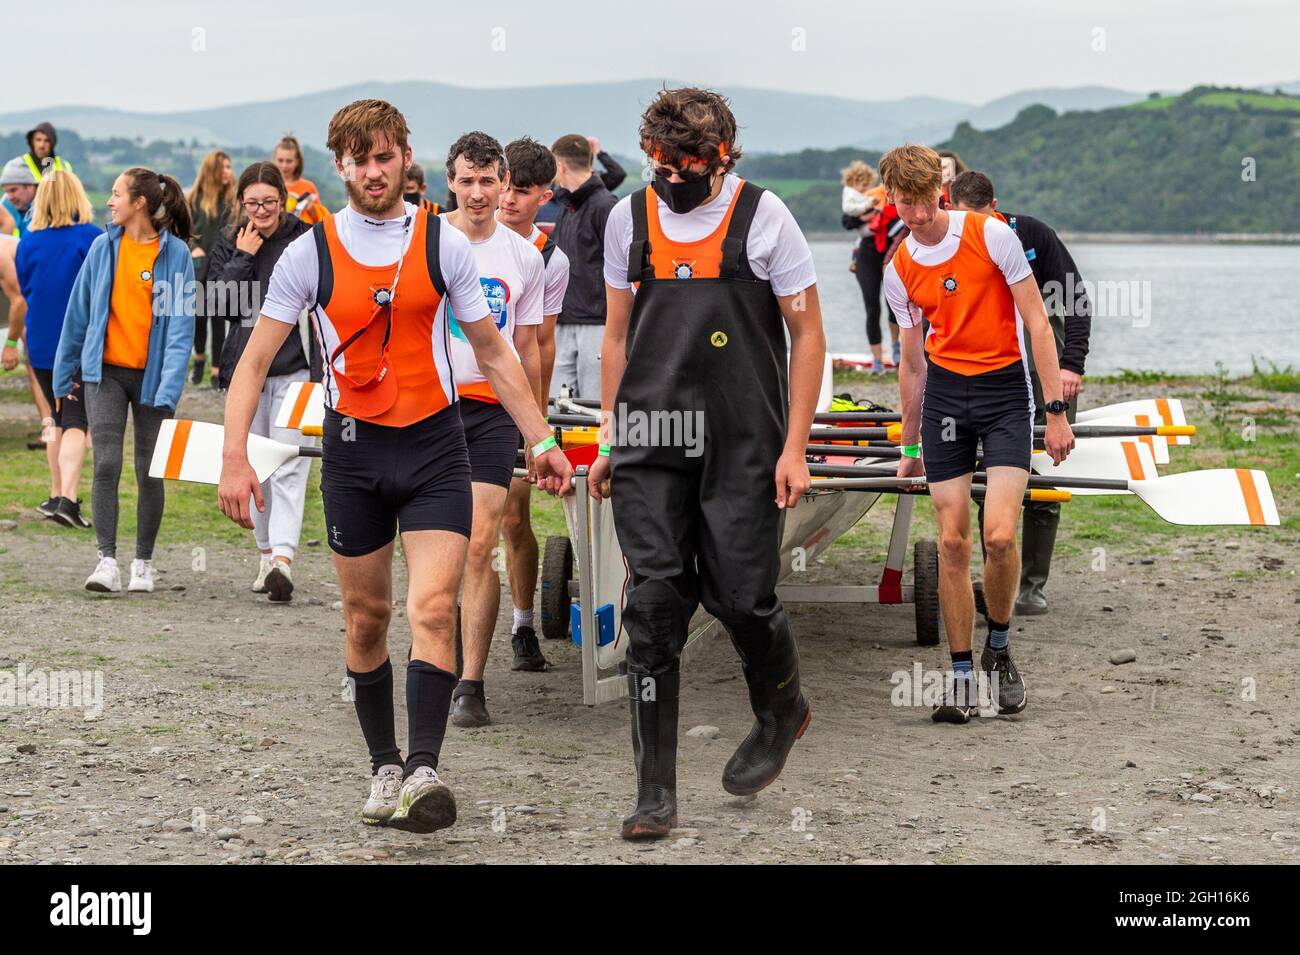 Bantry, West Cork, Ireland. 4th Sep, 2021. Rowing Ireland is holding the national offshore rowing championships in Bantry this weekend. The event, hosted by Bantry Rowing Club, is being contested by 30 rowing clubs from around Ireland. Arklow Rowing Club was at the championships. Credit: AG News/Alamy Live News Stock Photo